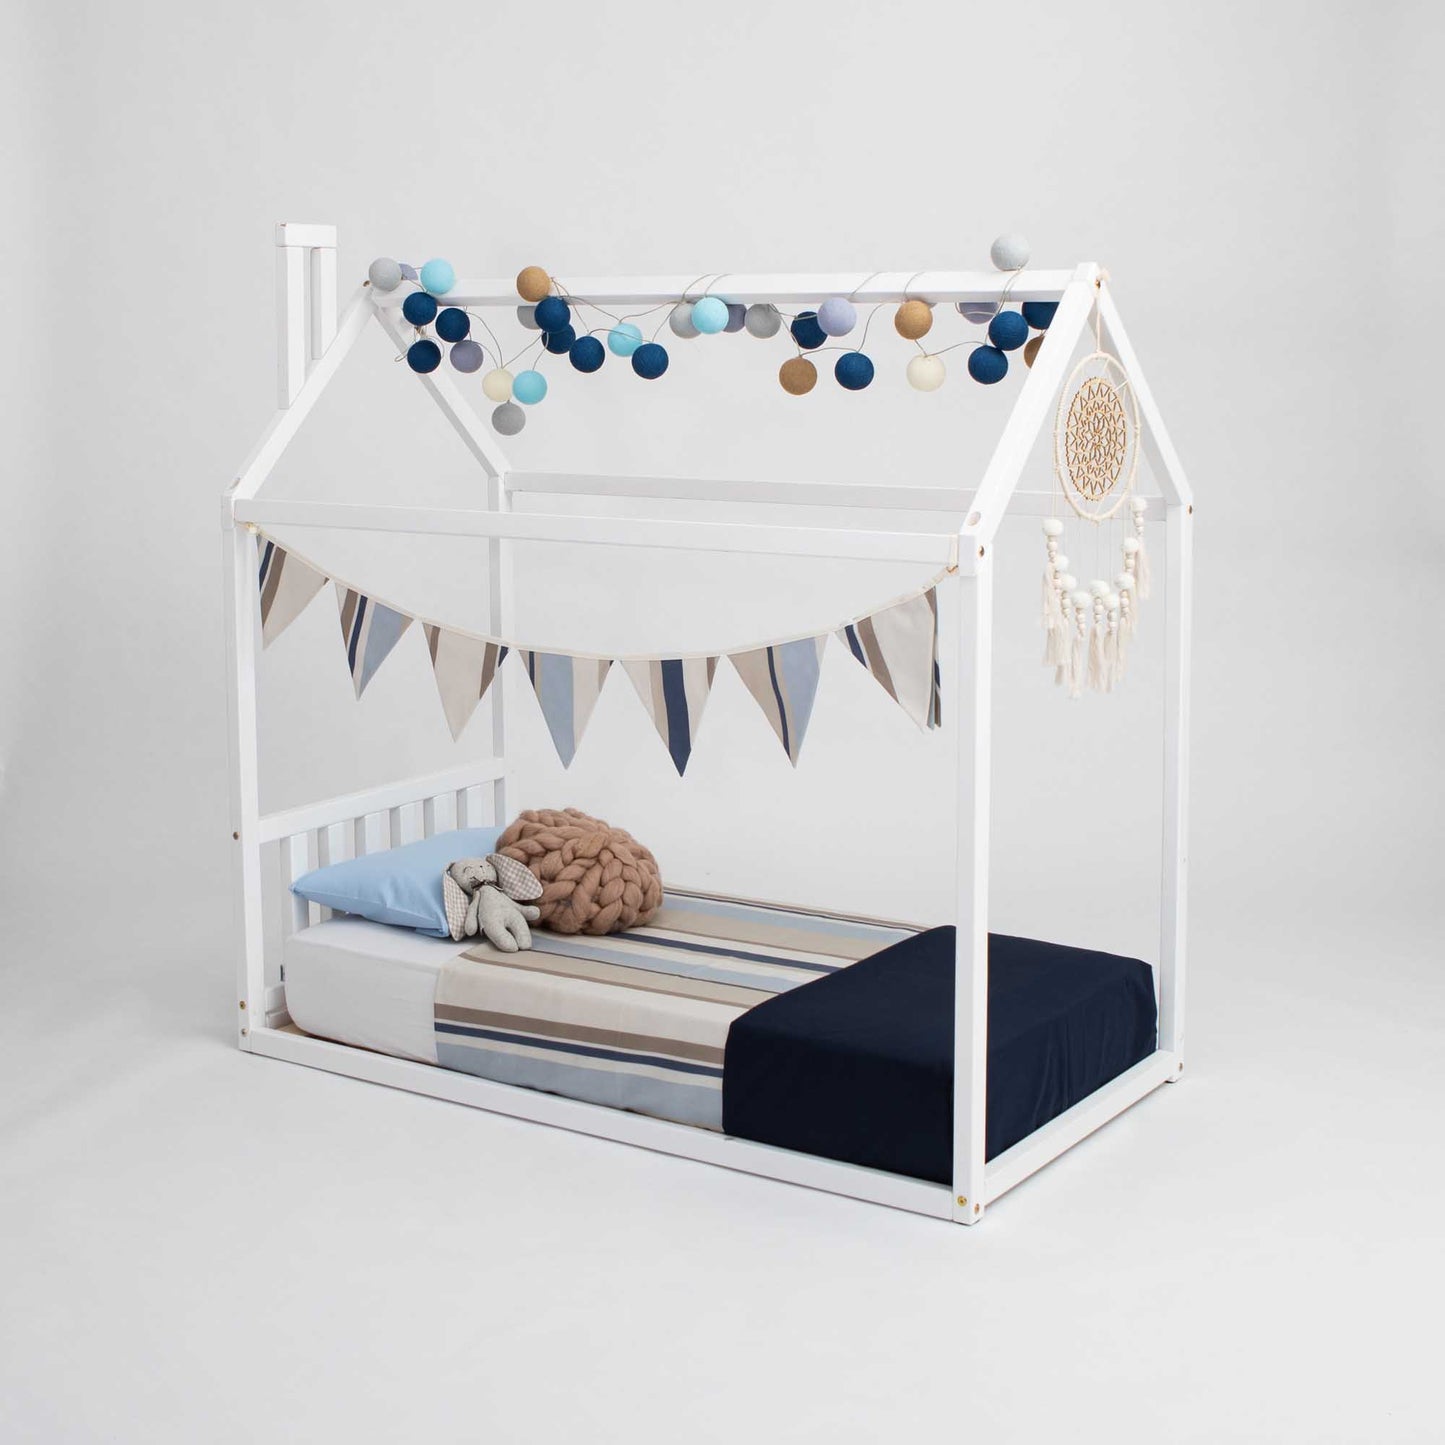 A Sweet Home From Wood House-frame Bed with a white canopy and cozy sleep.